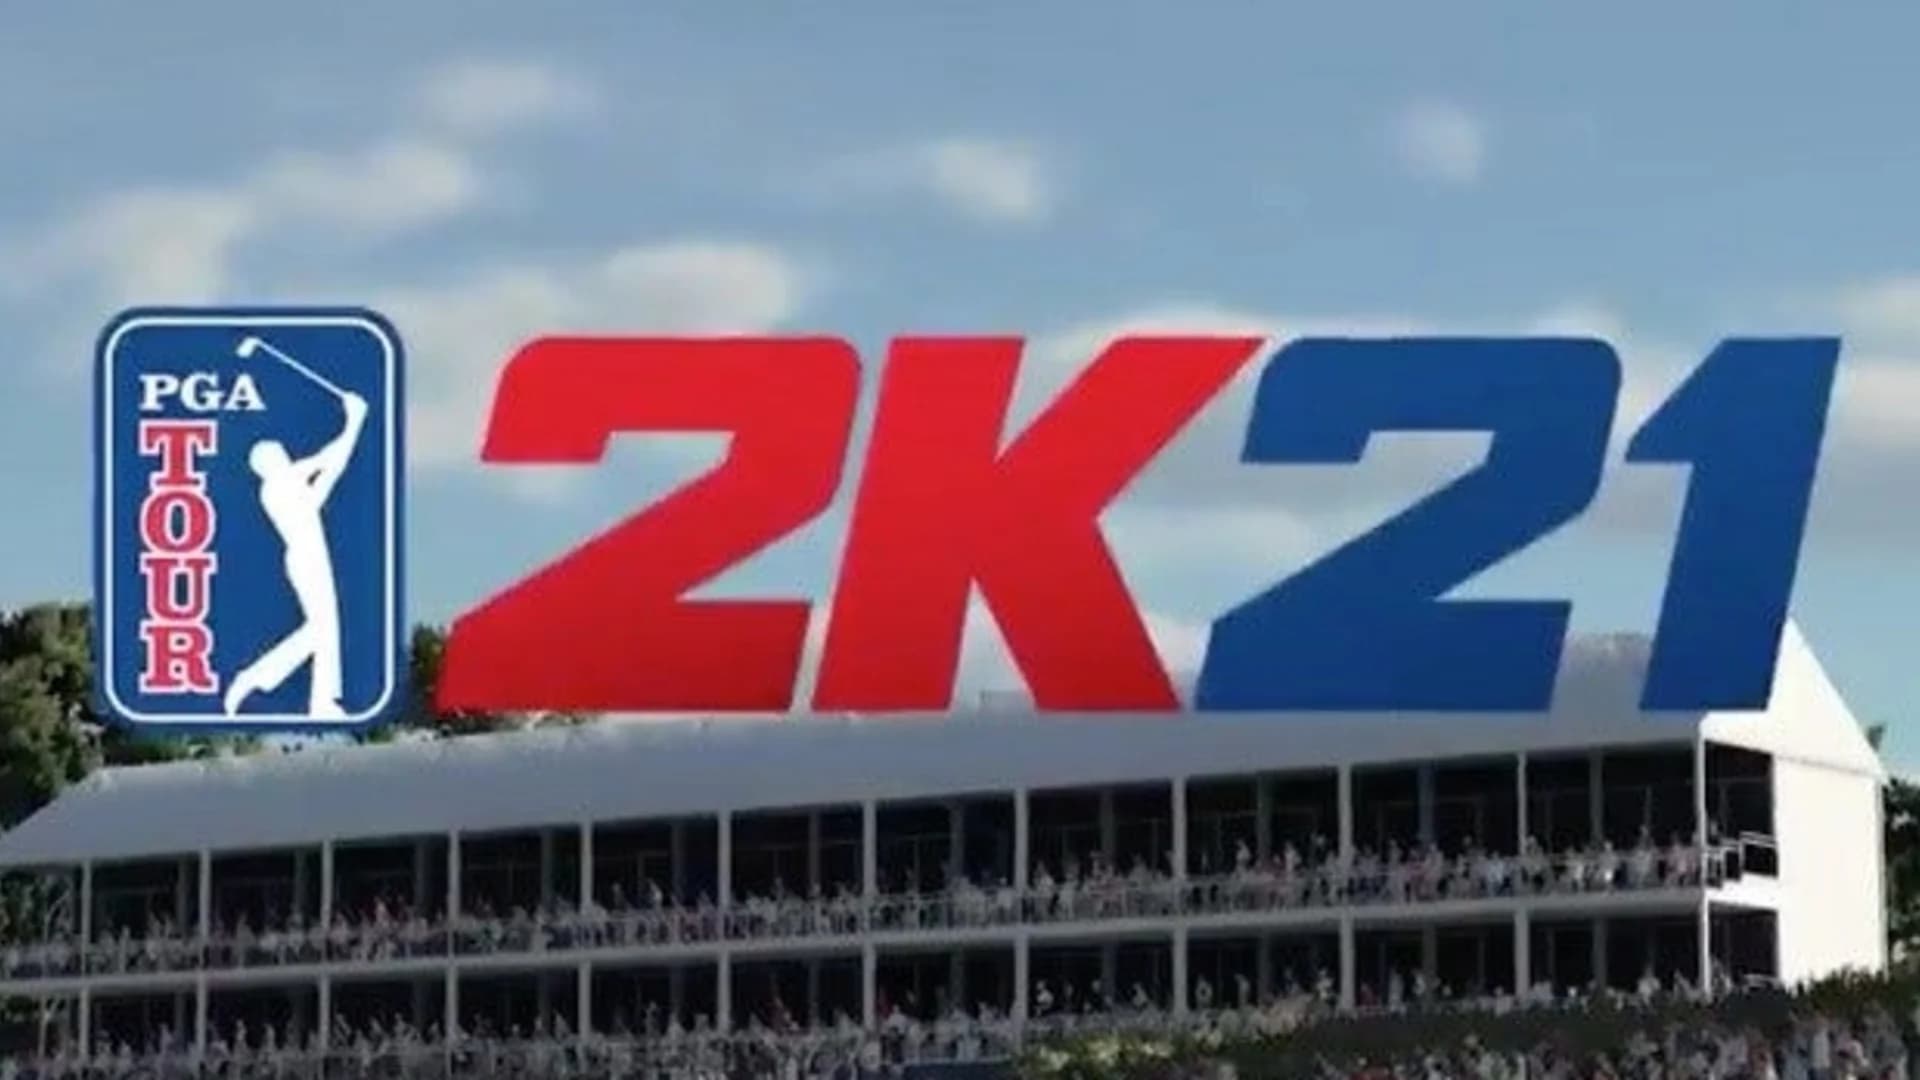 PGA Tour 2K21: Preview released for new video game